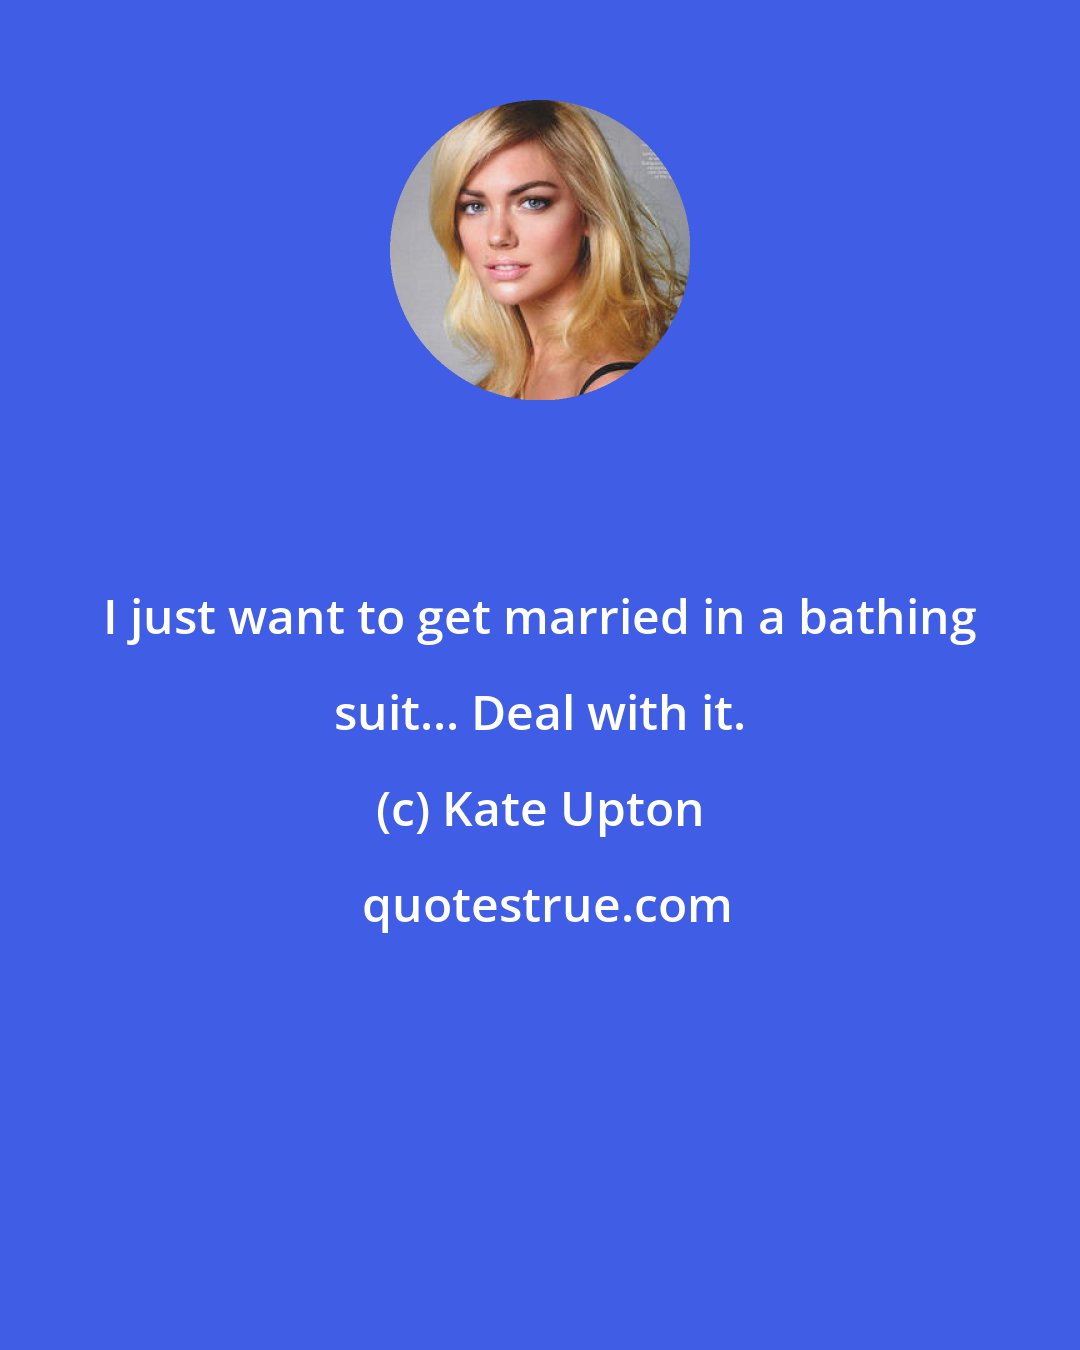 Kate Upton: I just want to get married in a bathing suit... Deal with it.